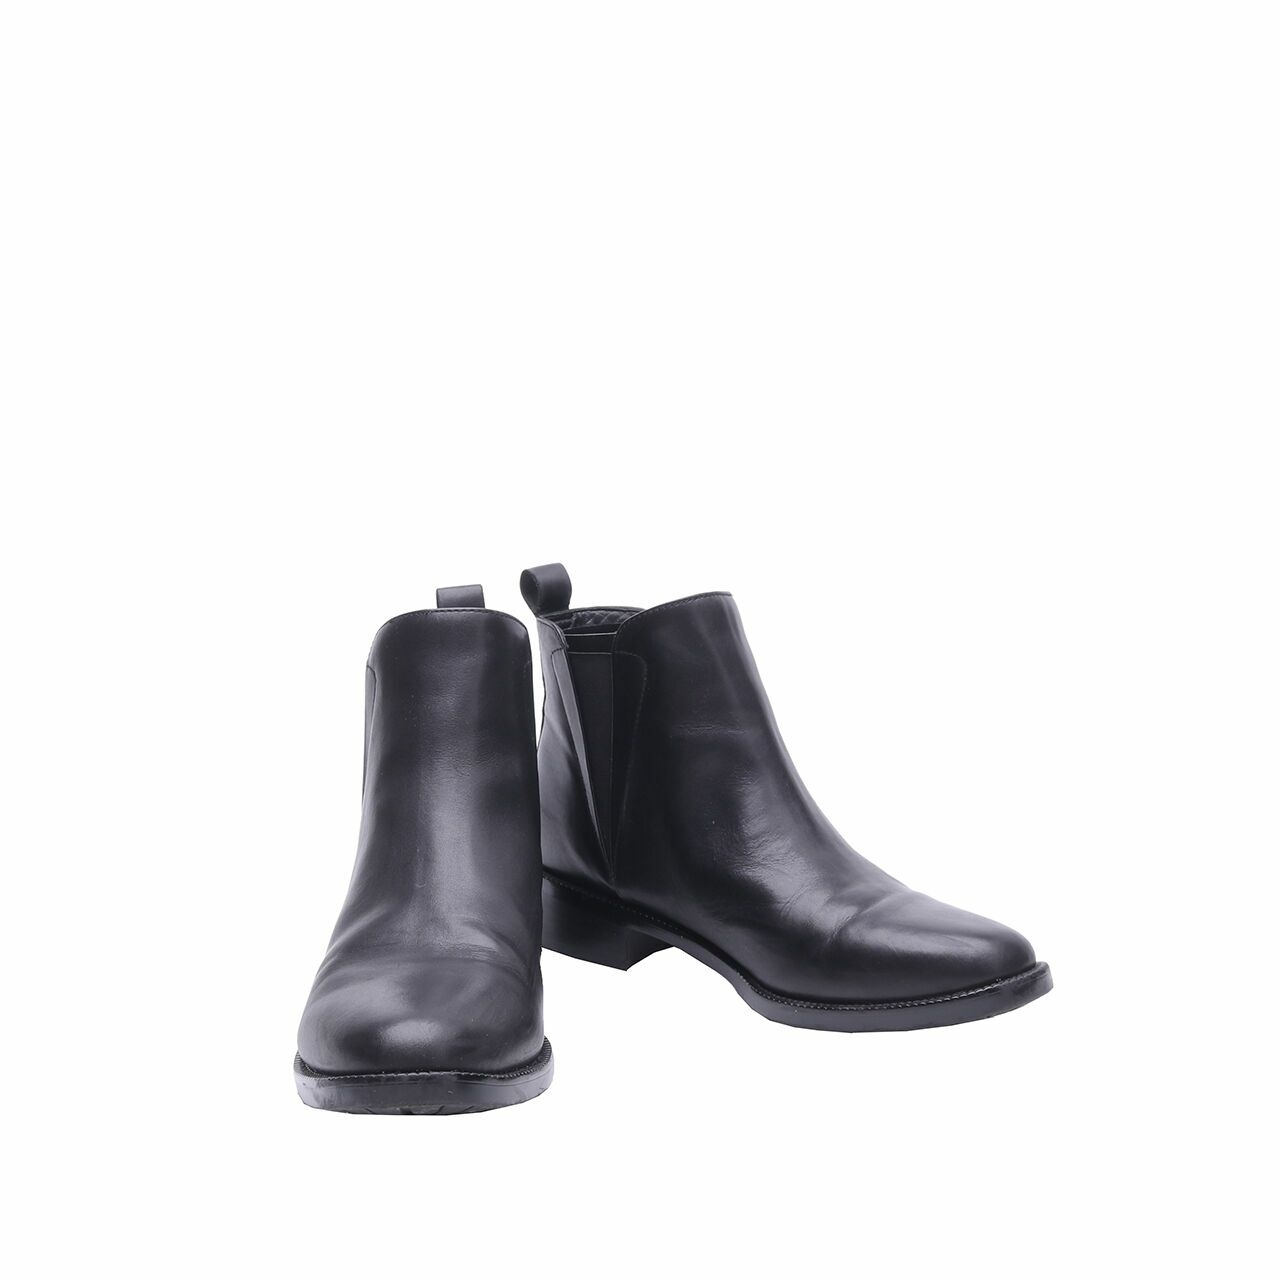 Staccato Black Boots